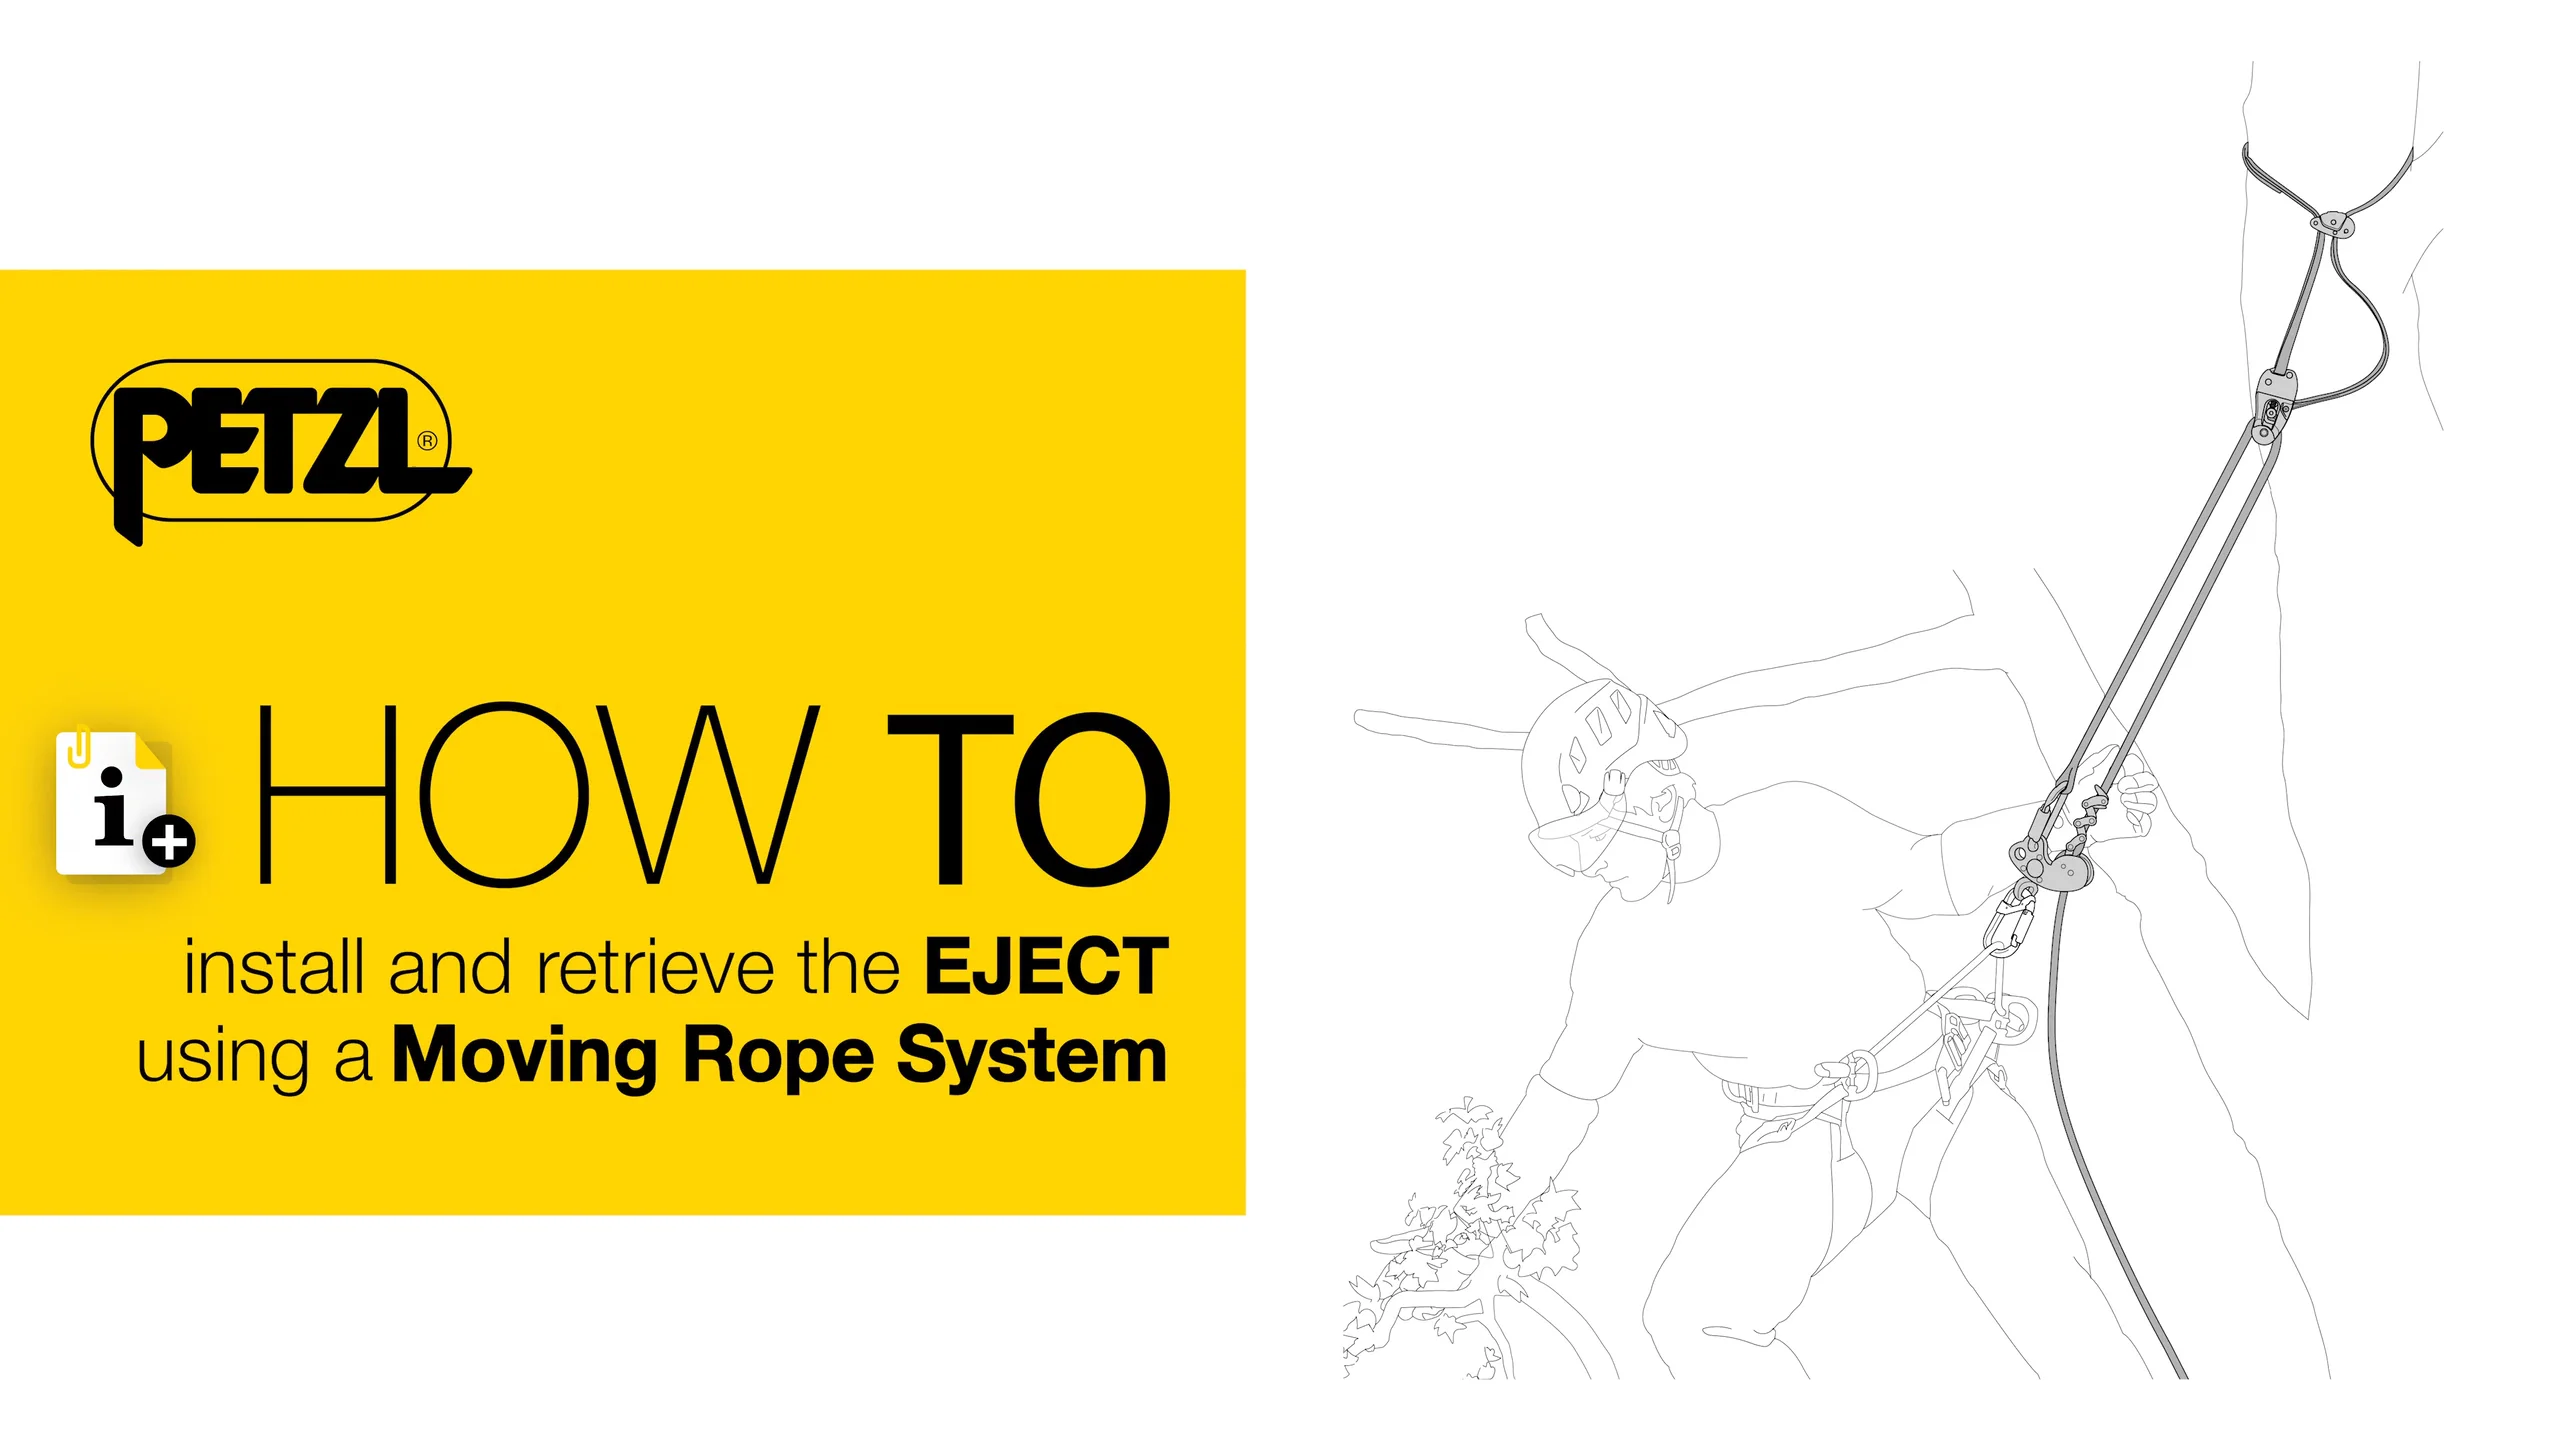 How To - Install and retrieve the EJECT using a Moving Rope System on Vimeo